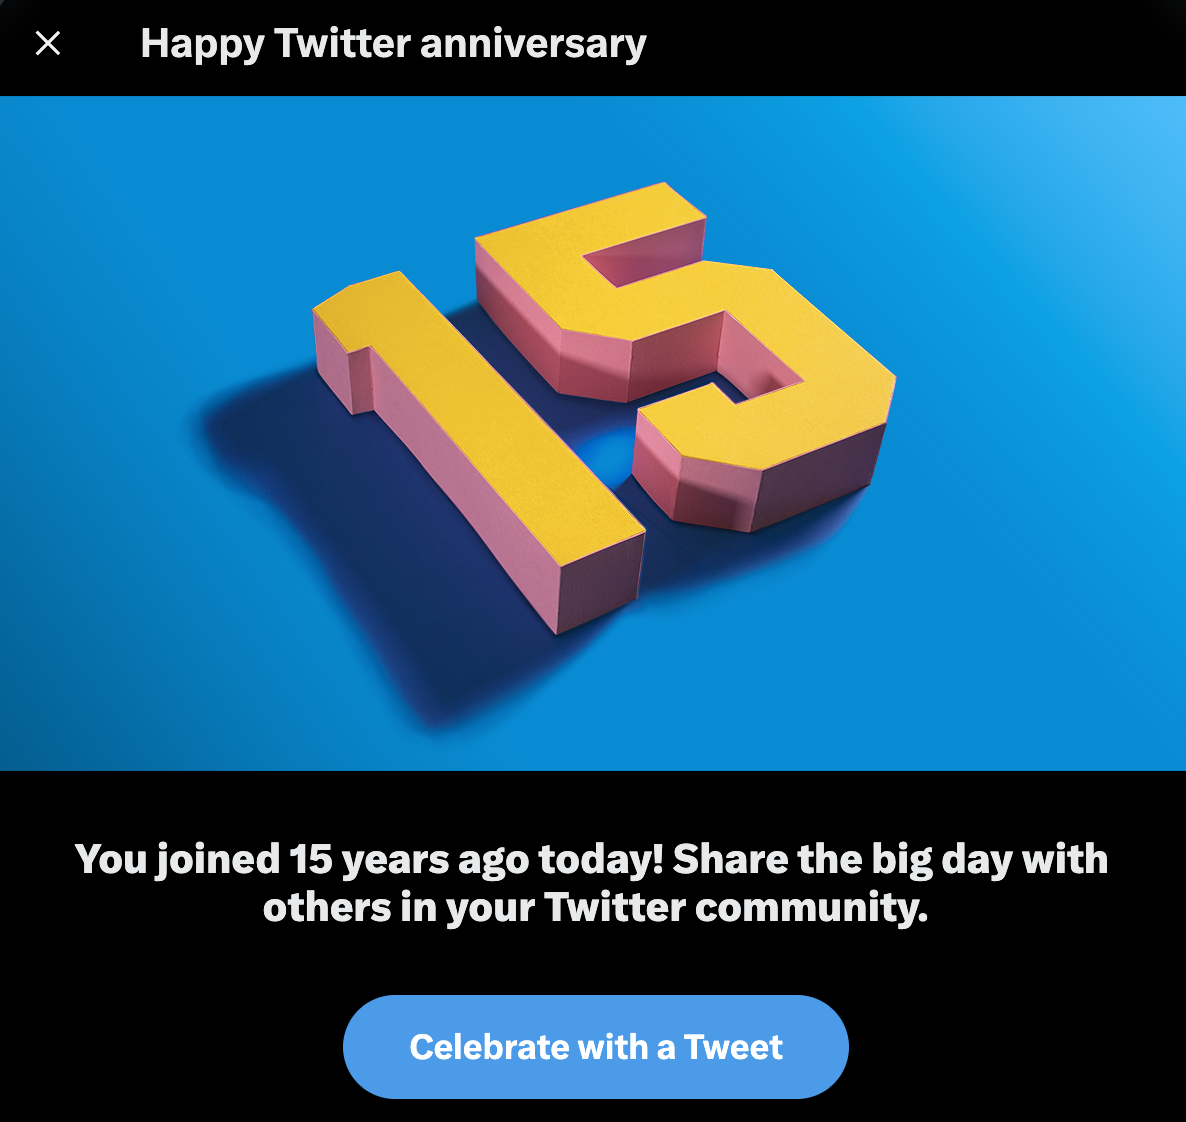 Screenshot of my “Happy Twitter anniversary” message that said I joined Twitter 15 years ago